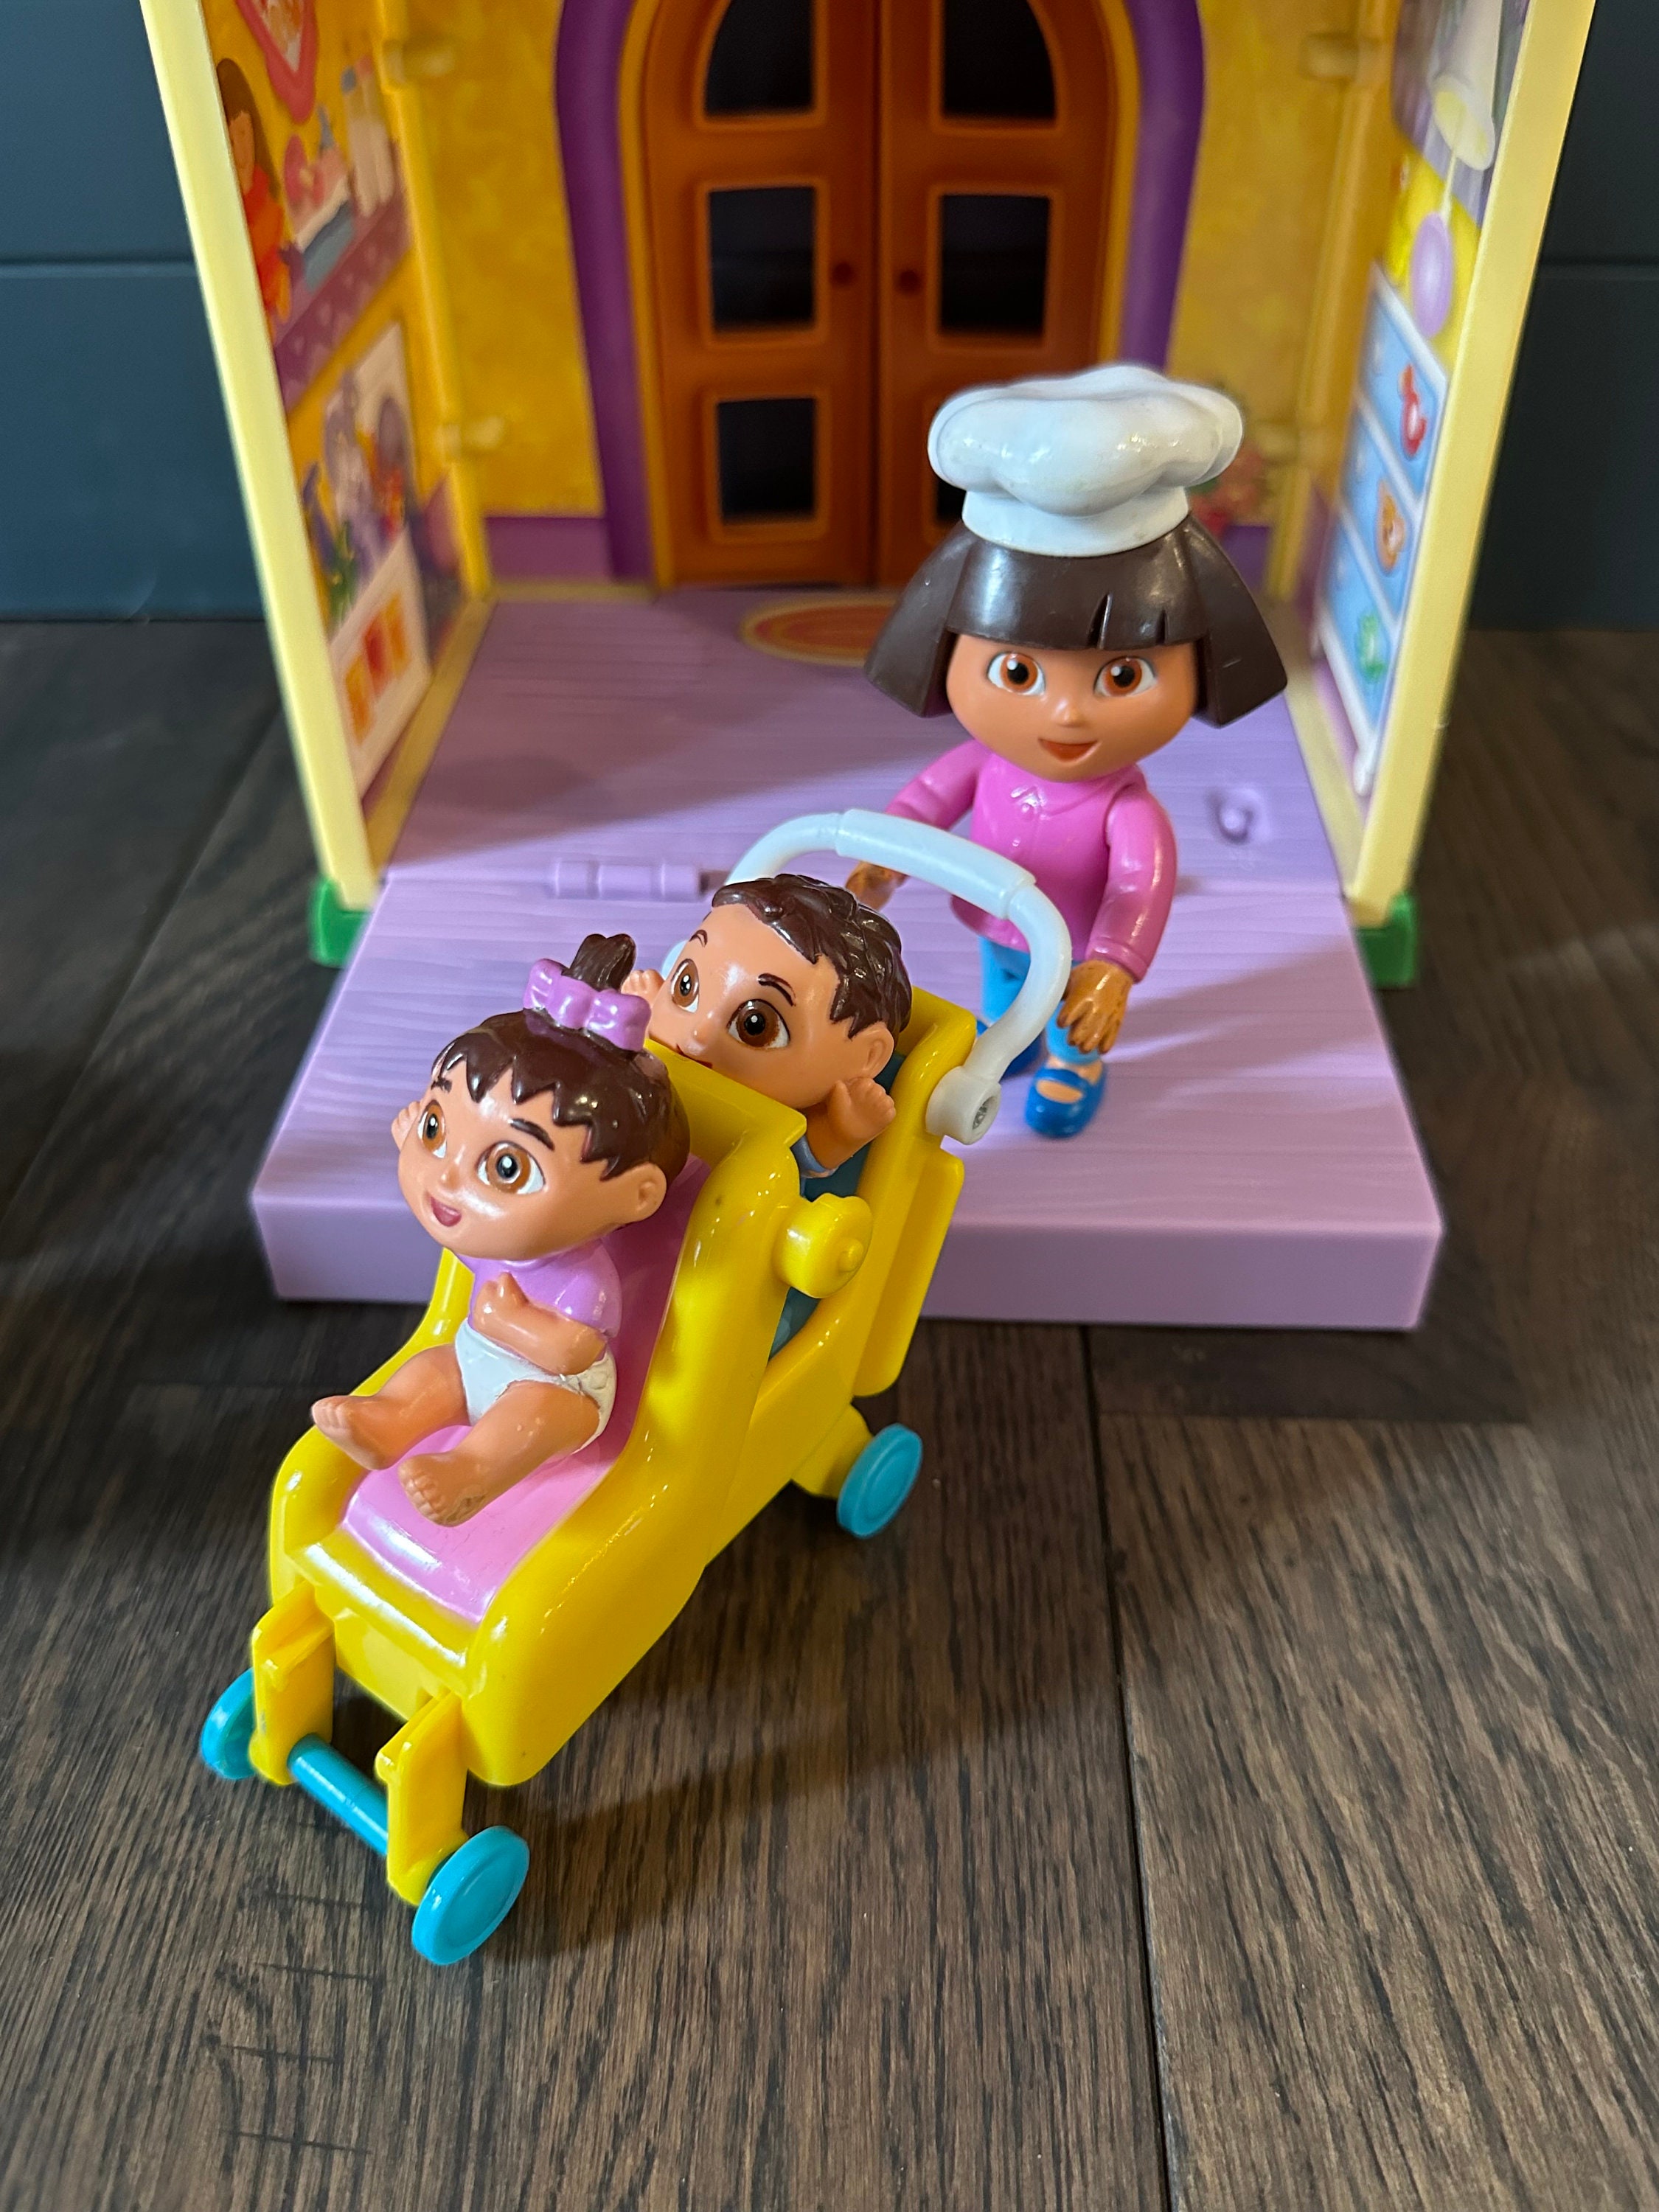 Dora the Explorer: Dora's Playtime with the Twins